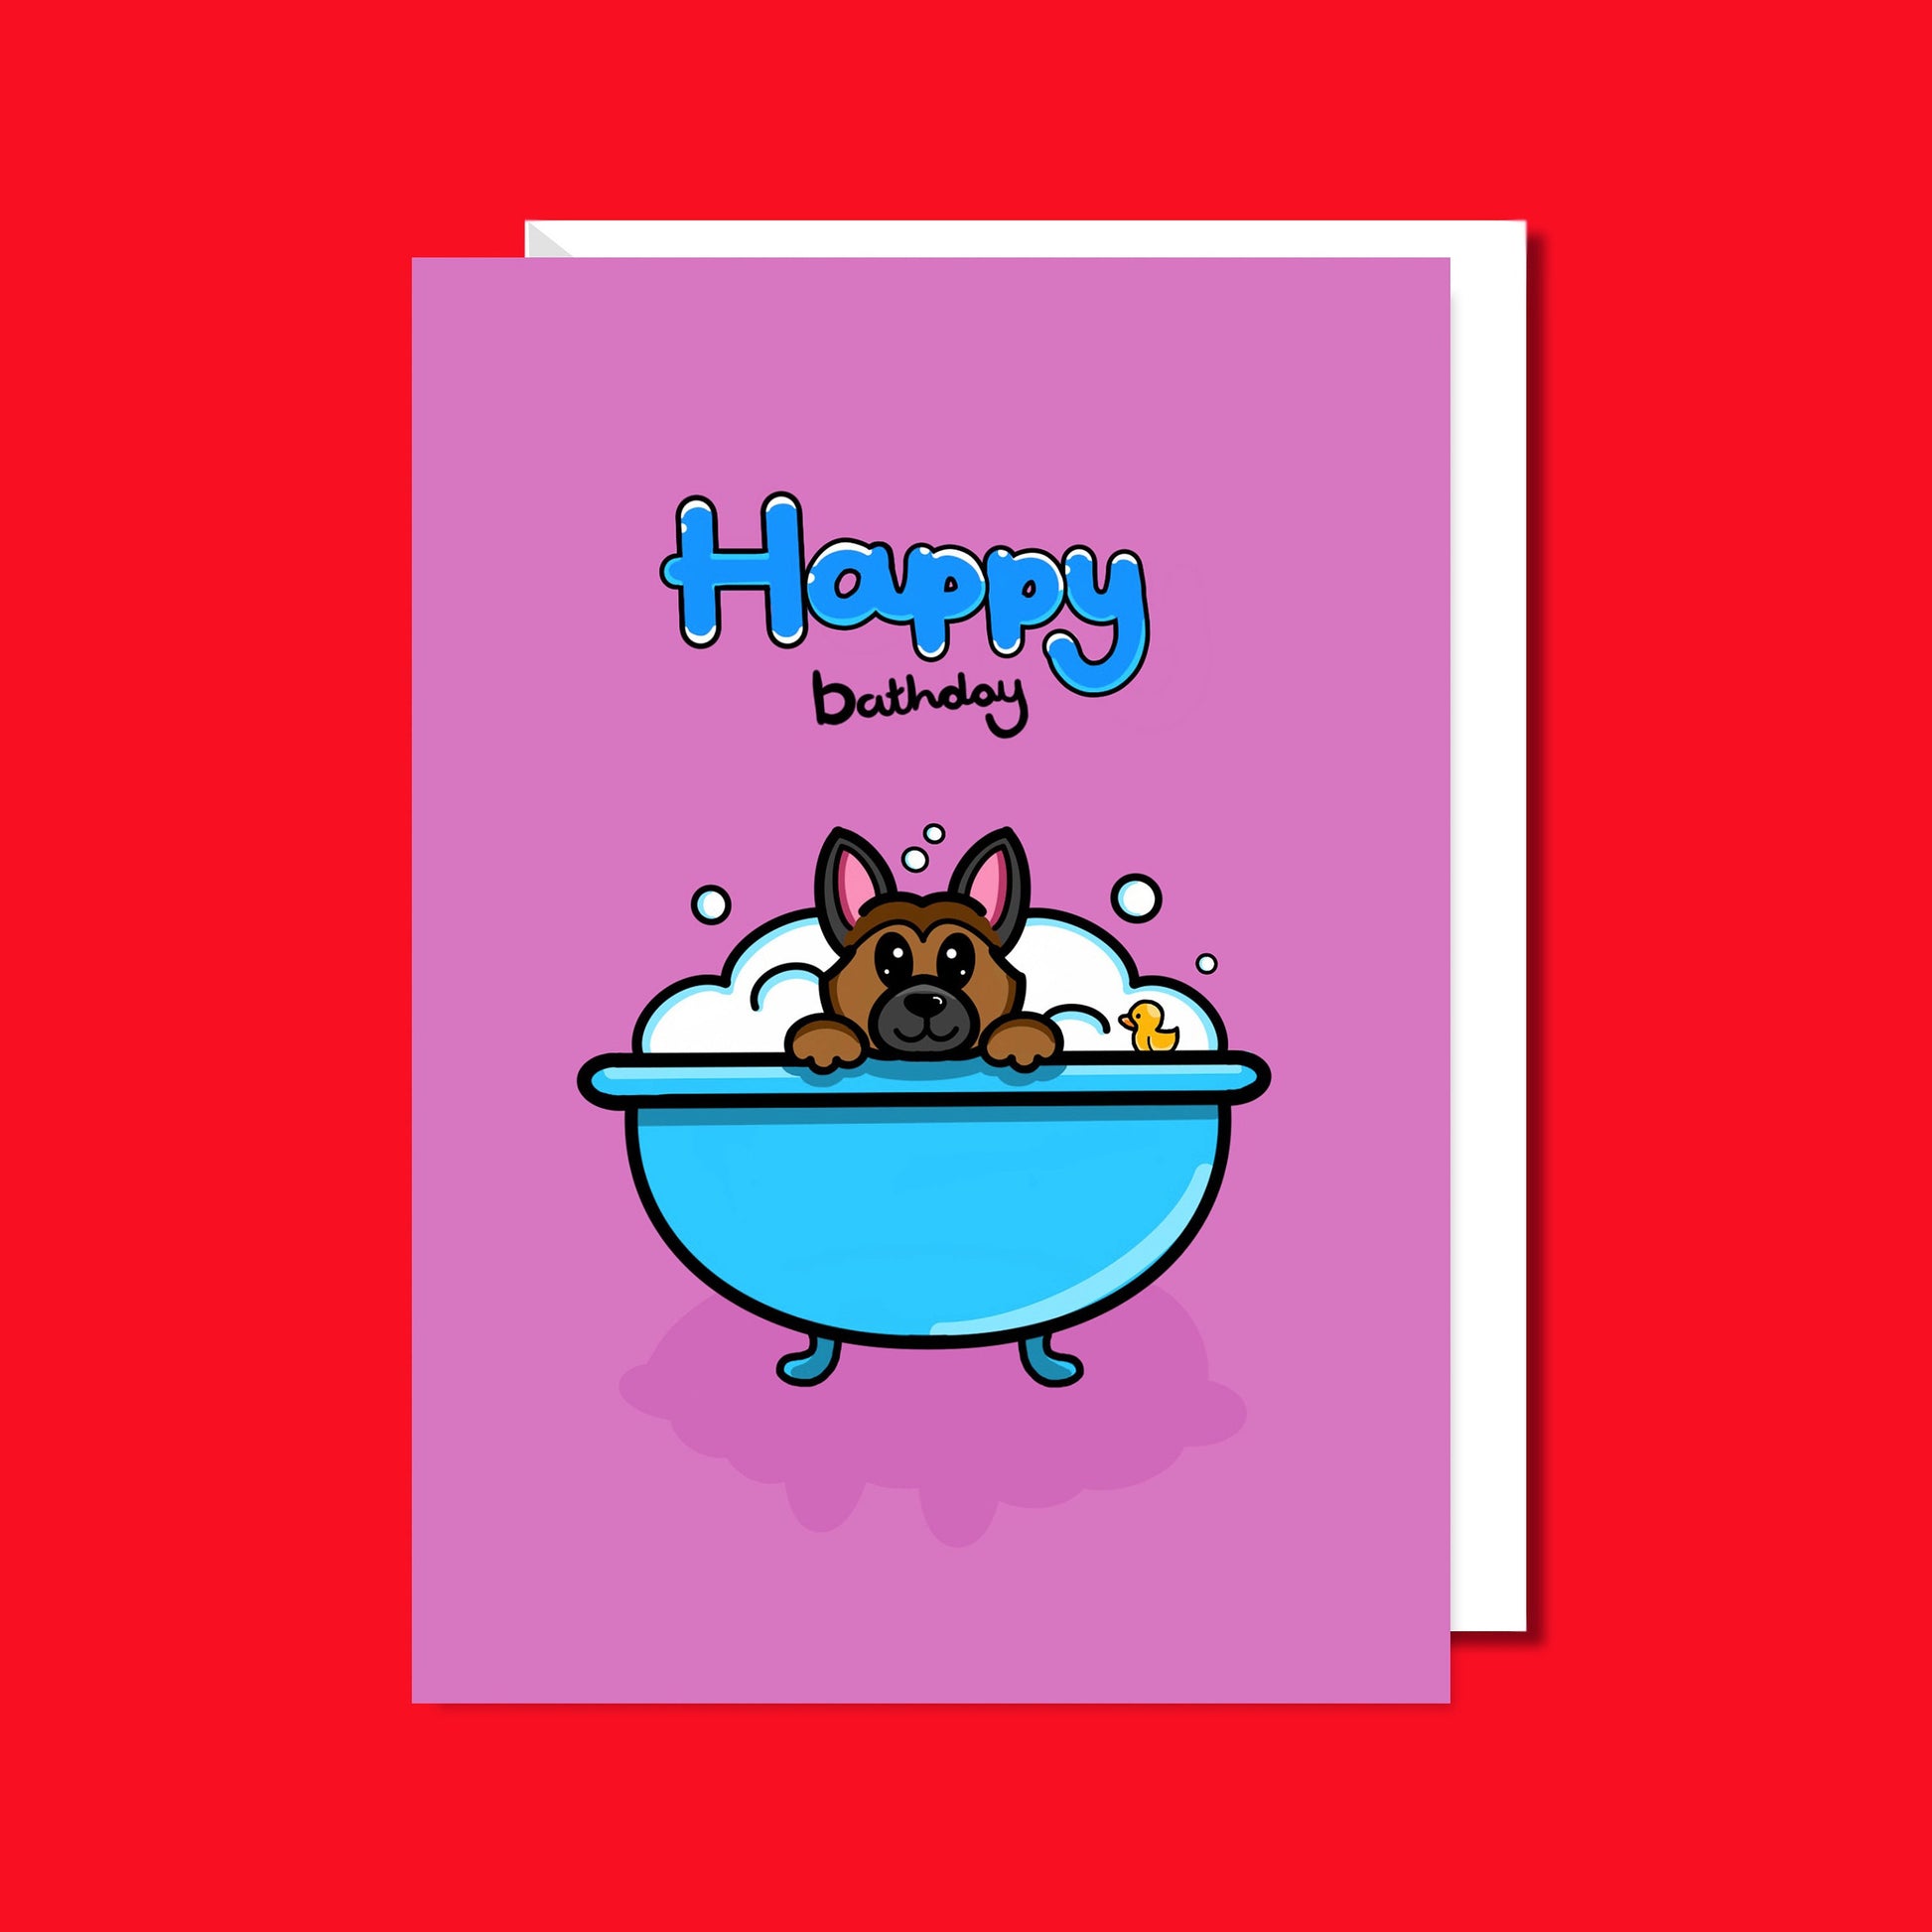 The Happy Bathday Dog Birthday Card on a red background with a white envelope underneath. The pink base a6 card features a happy alsatian german shepherd dog peeking over a blue bath tub full of bubbles and a yellow rubber duck. Above this reads 'happy bathday' in blue bubble writing for 'happy' and black script writing for 'bathday'. The birthday themed card is inspired by dog parents, dog lovers and celebrations.